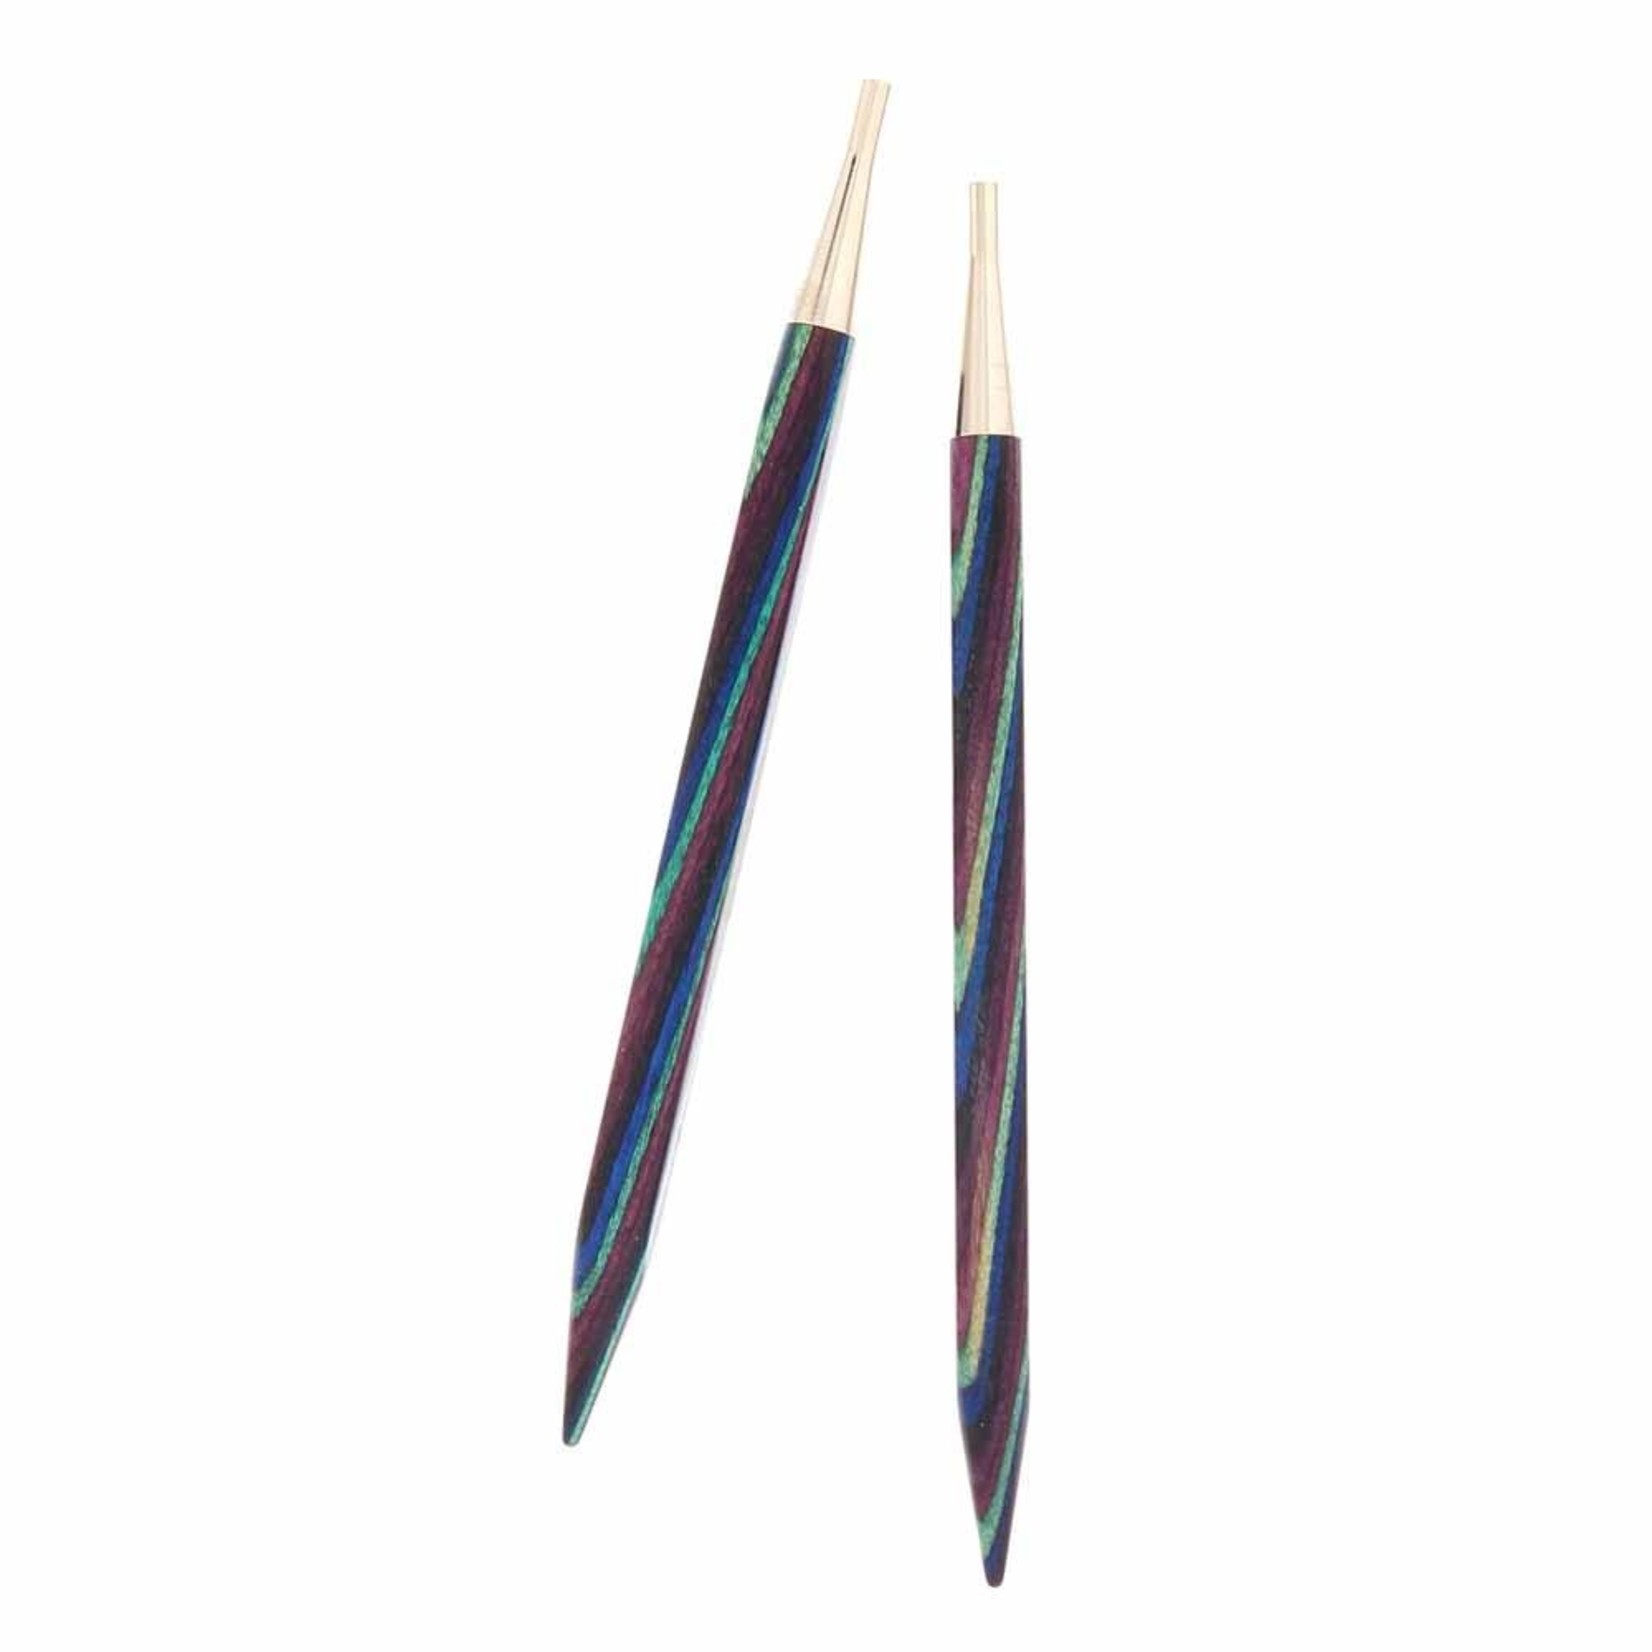 Knit Picks Foursquare Majestic Wood Interchangeable Circular Needle Tips 12cm (5") by KNIT PICKS